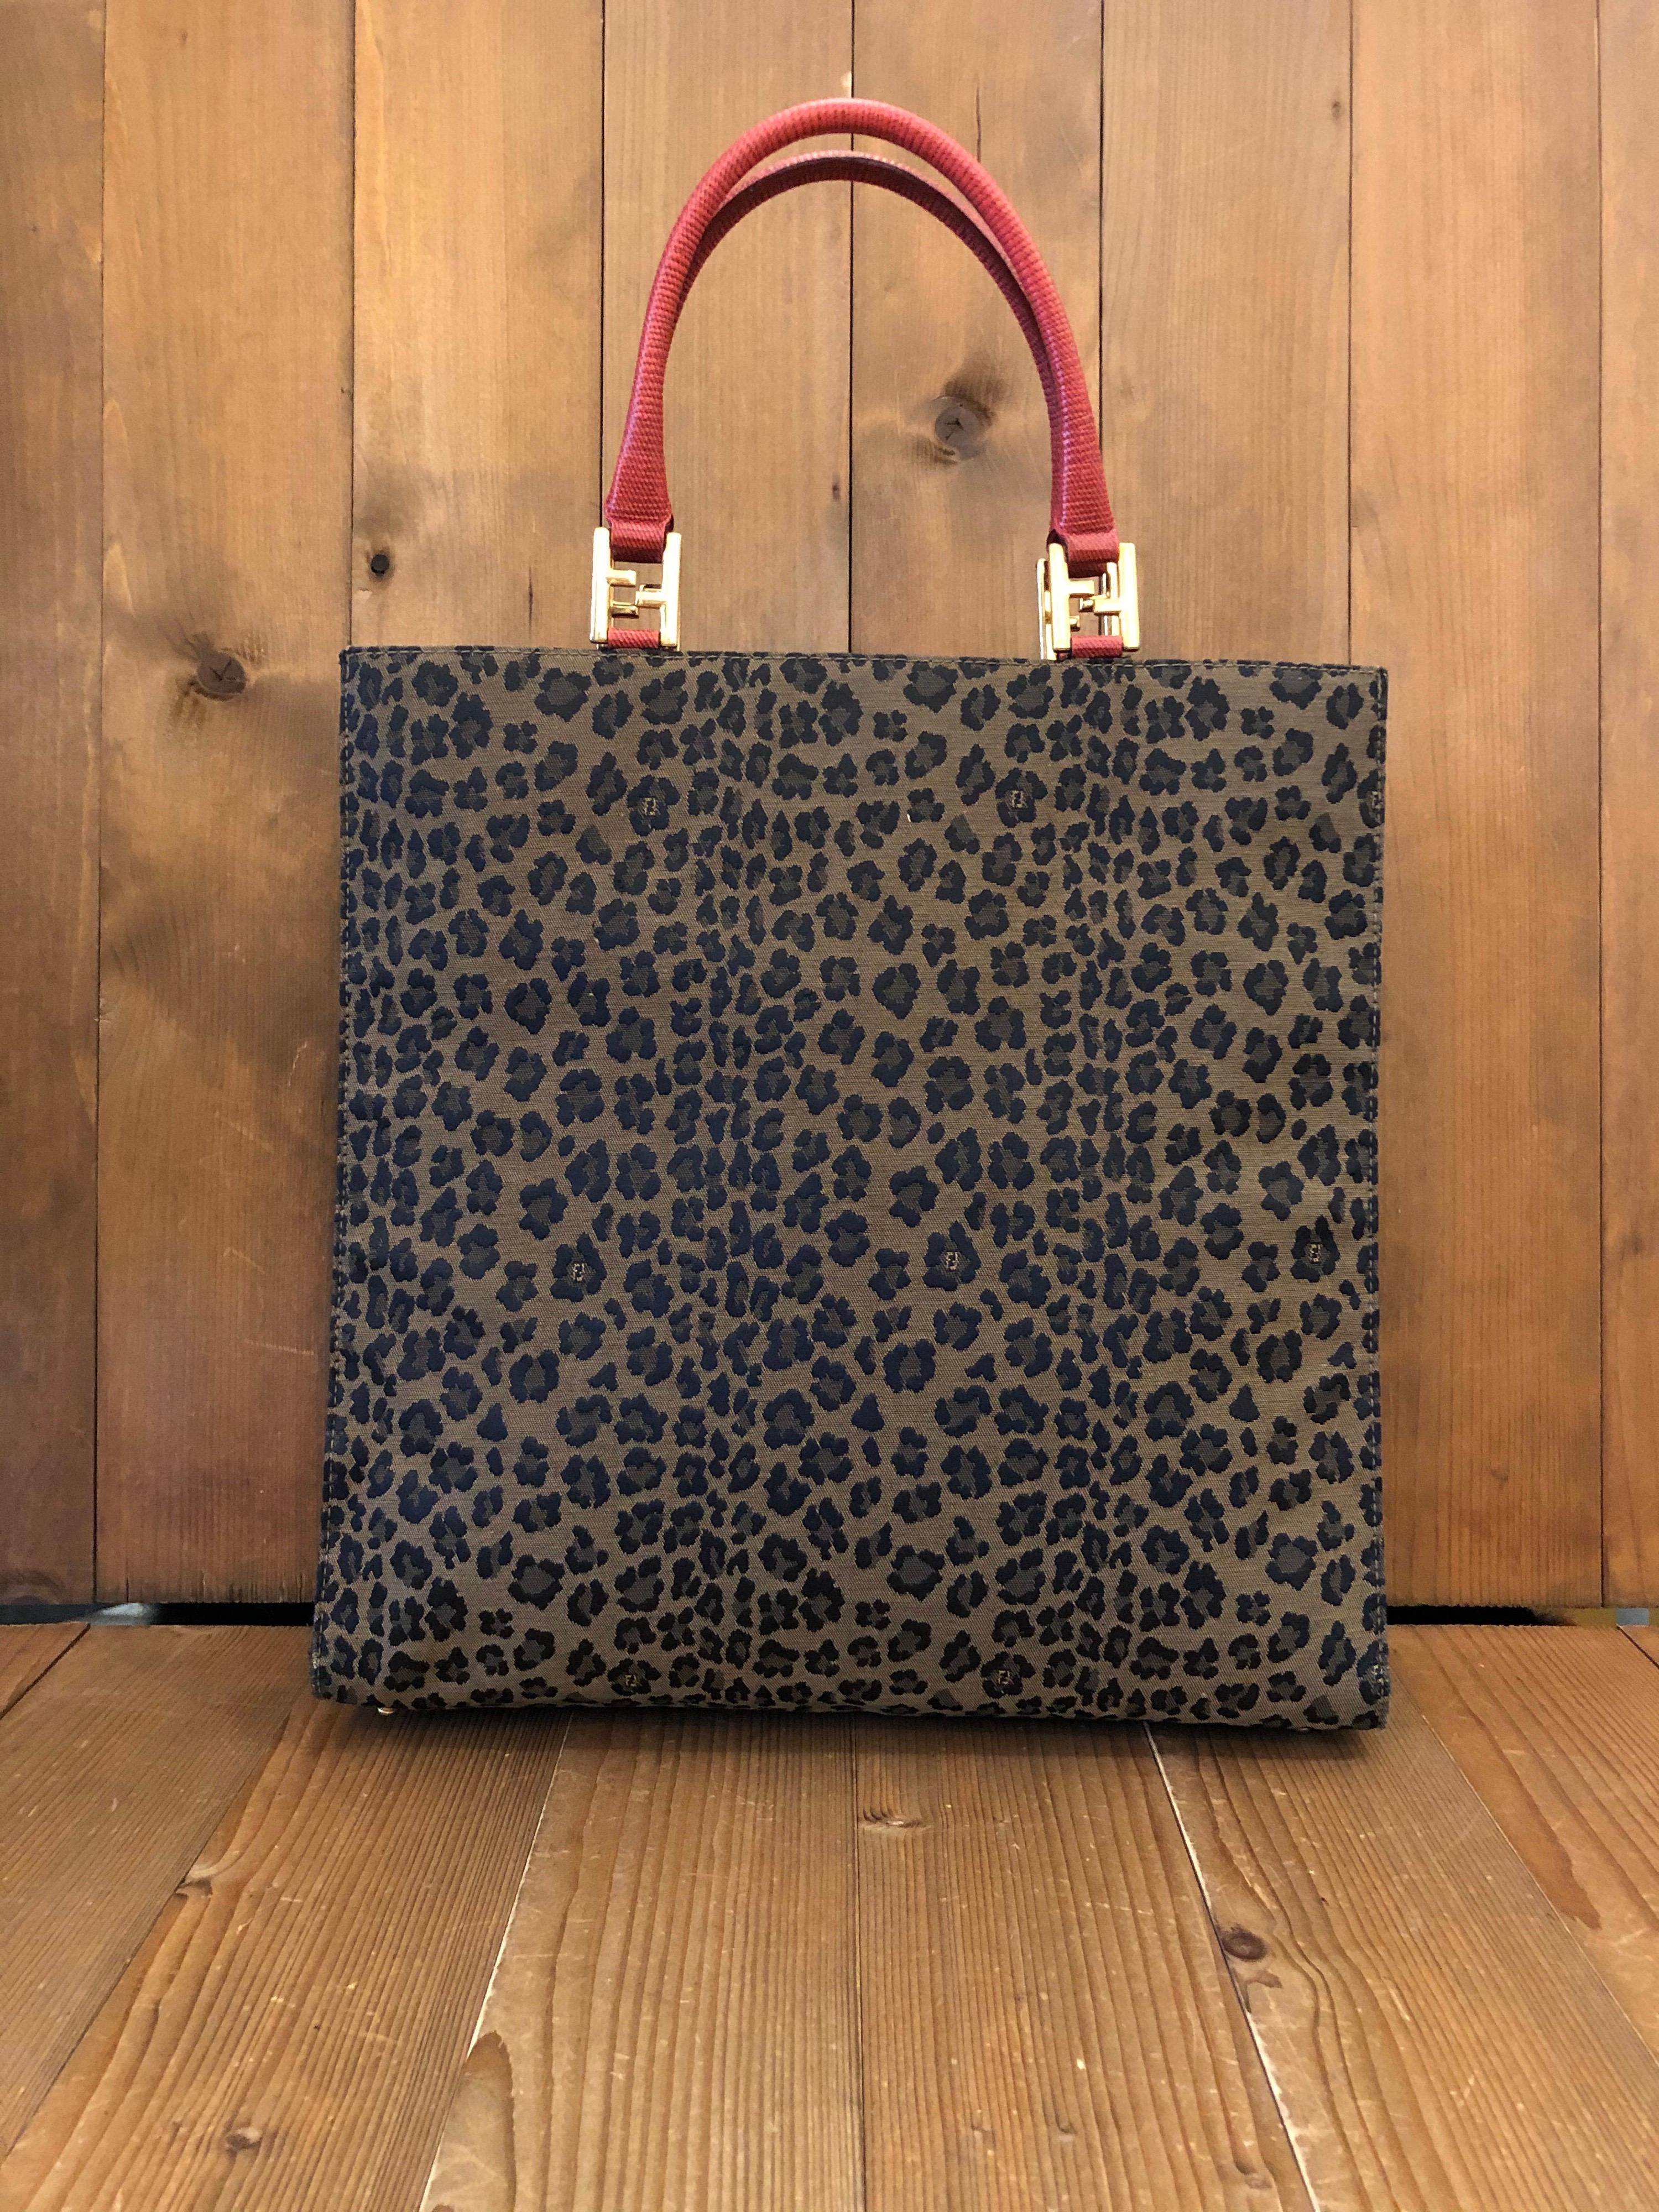 1990s Fendi book tote in brown and black leopard printed jacquard featuring one interior zip pocket. Made in Italy. Measures 13.5 x 13.5 x 4 inches Handle drop 6 inches

Condition - Minor signs of wear. Generally in good condition.

Outside: Minimal